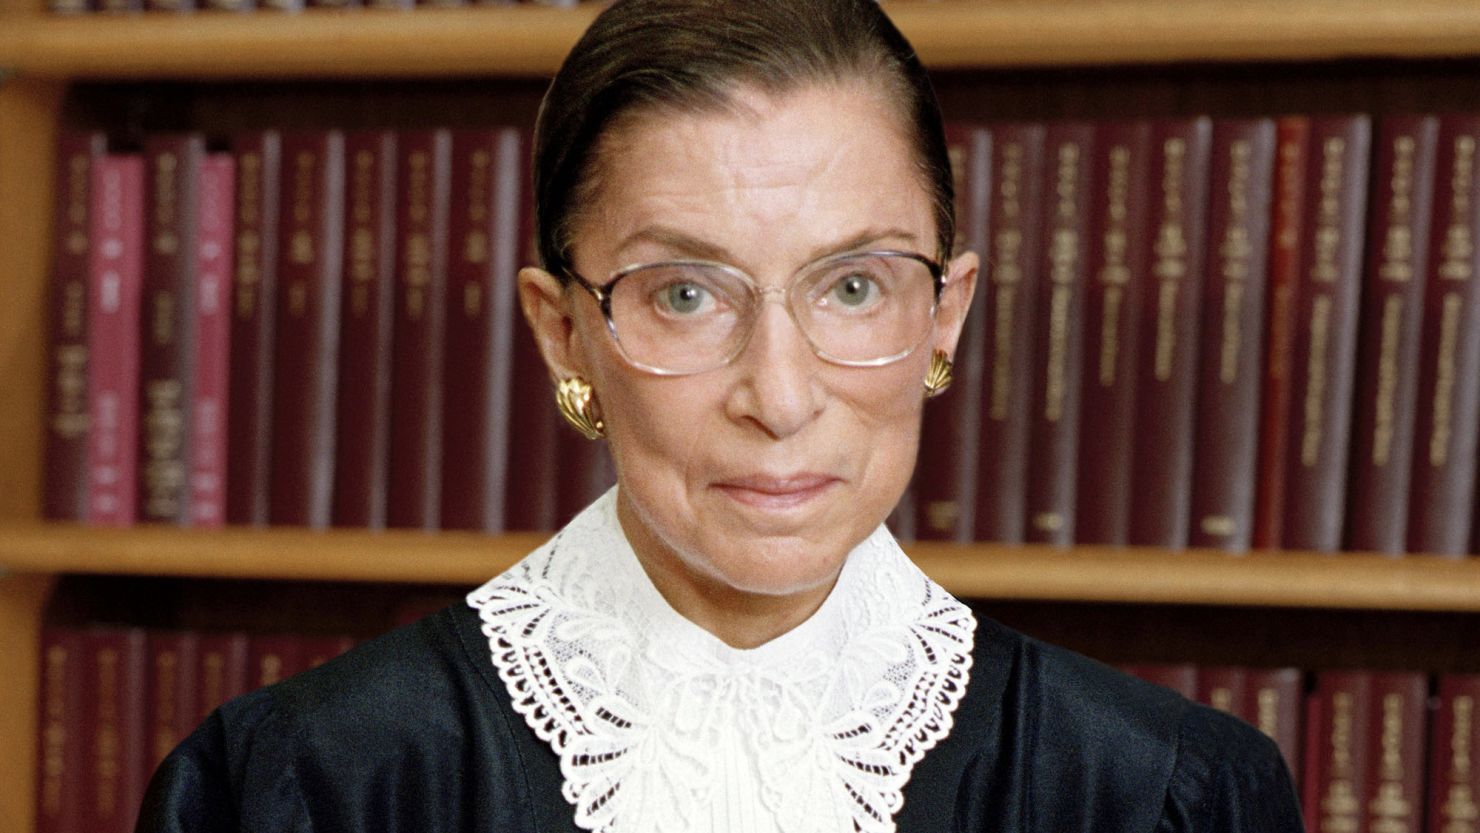 Justice Ruth Bader Ginsburg suggested a rule excluding eyewitness testimony may not be practical or necessary. 